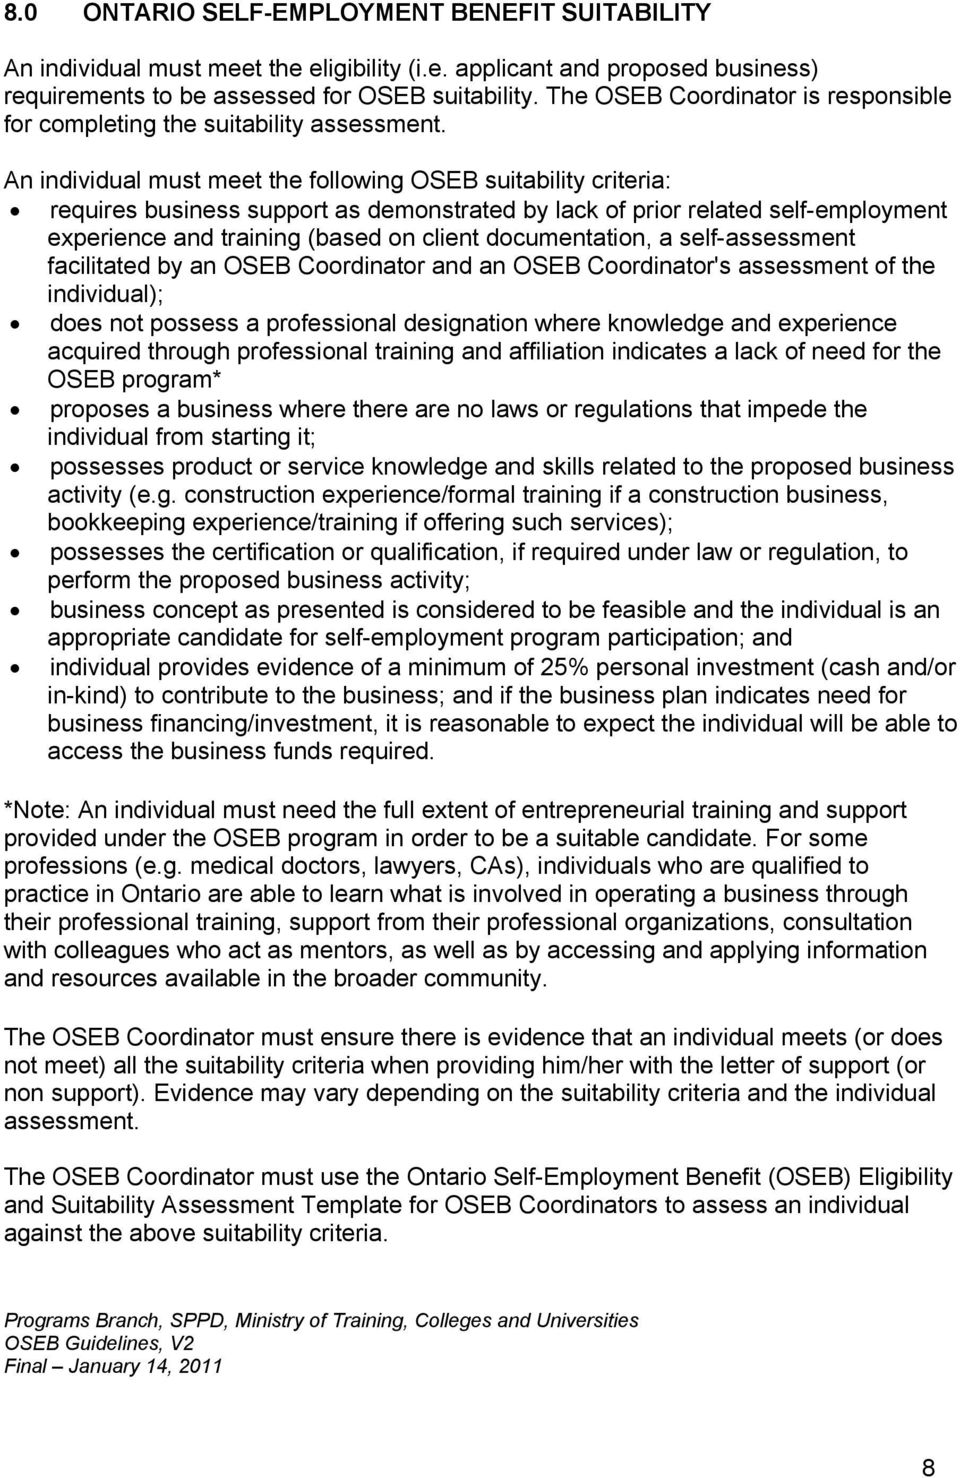 An individual must meet the following OSEB suitability criteria: requires business support as demonstrated by lack of prior related self-employment experience and training (based on client